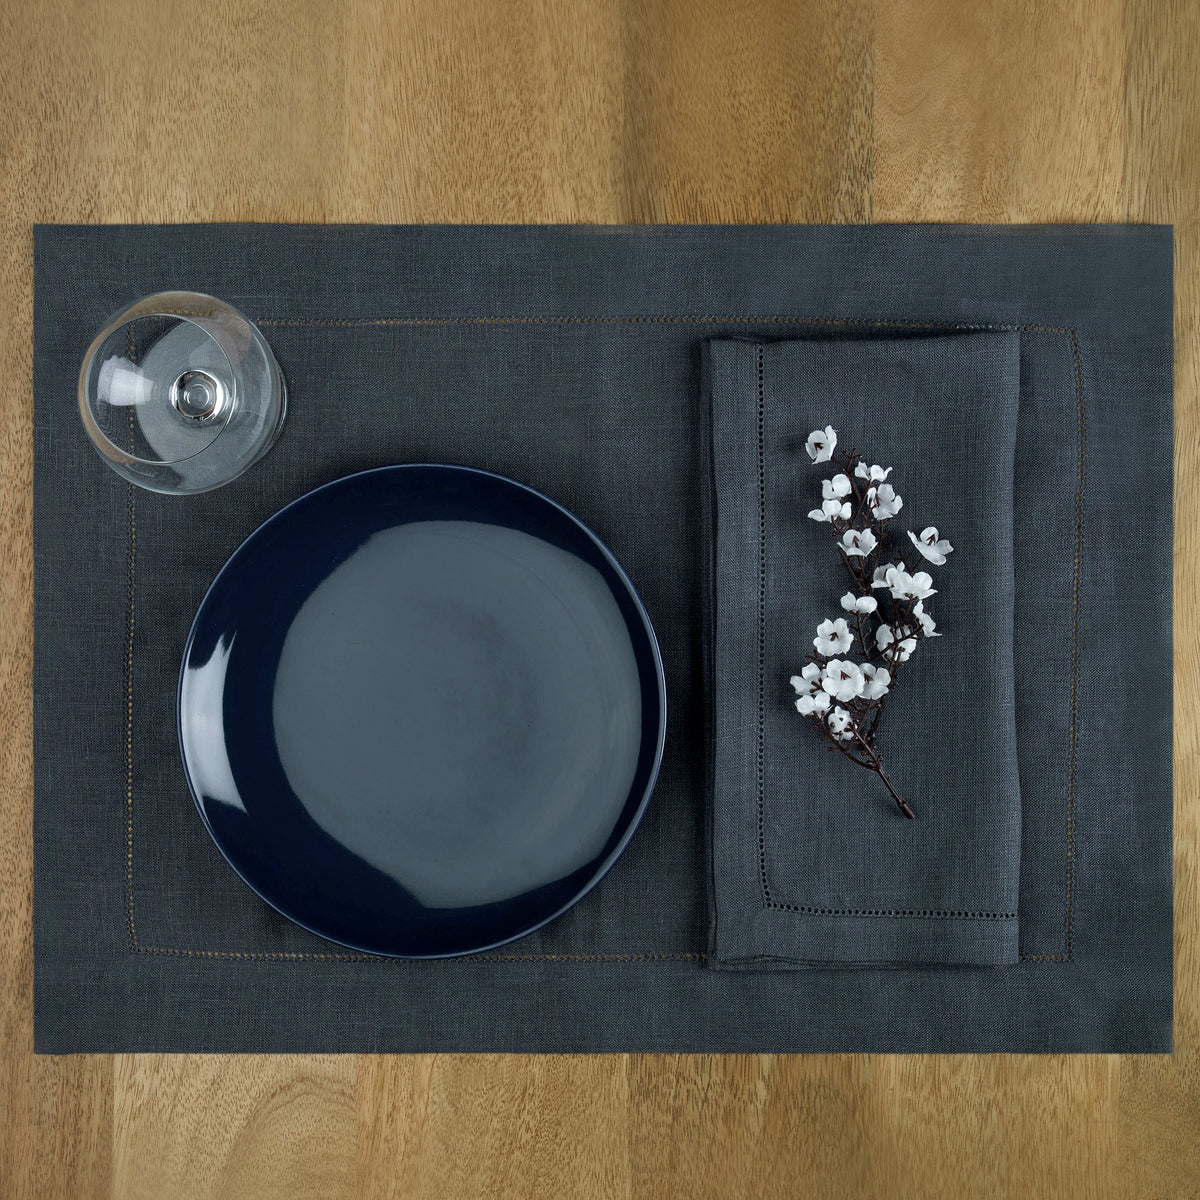 Charcoal Grey Linen Placemats 14 x 19 Inch Set of 4 - Hemstitch